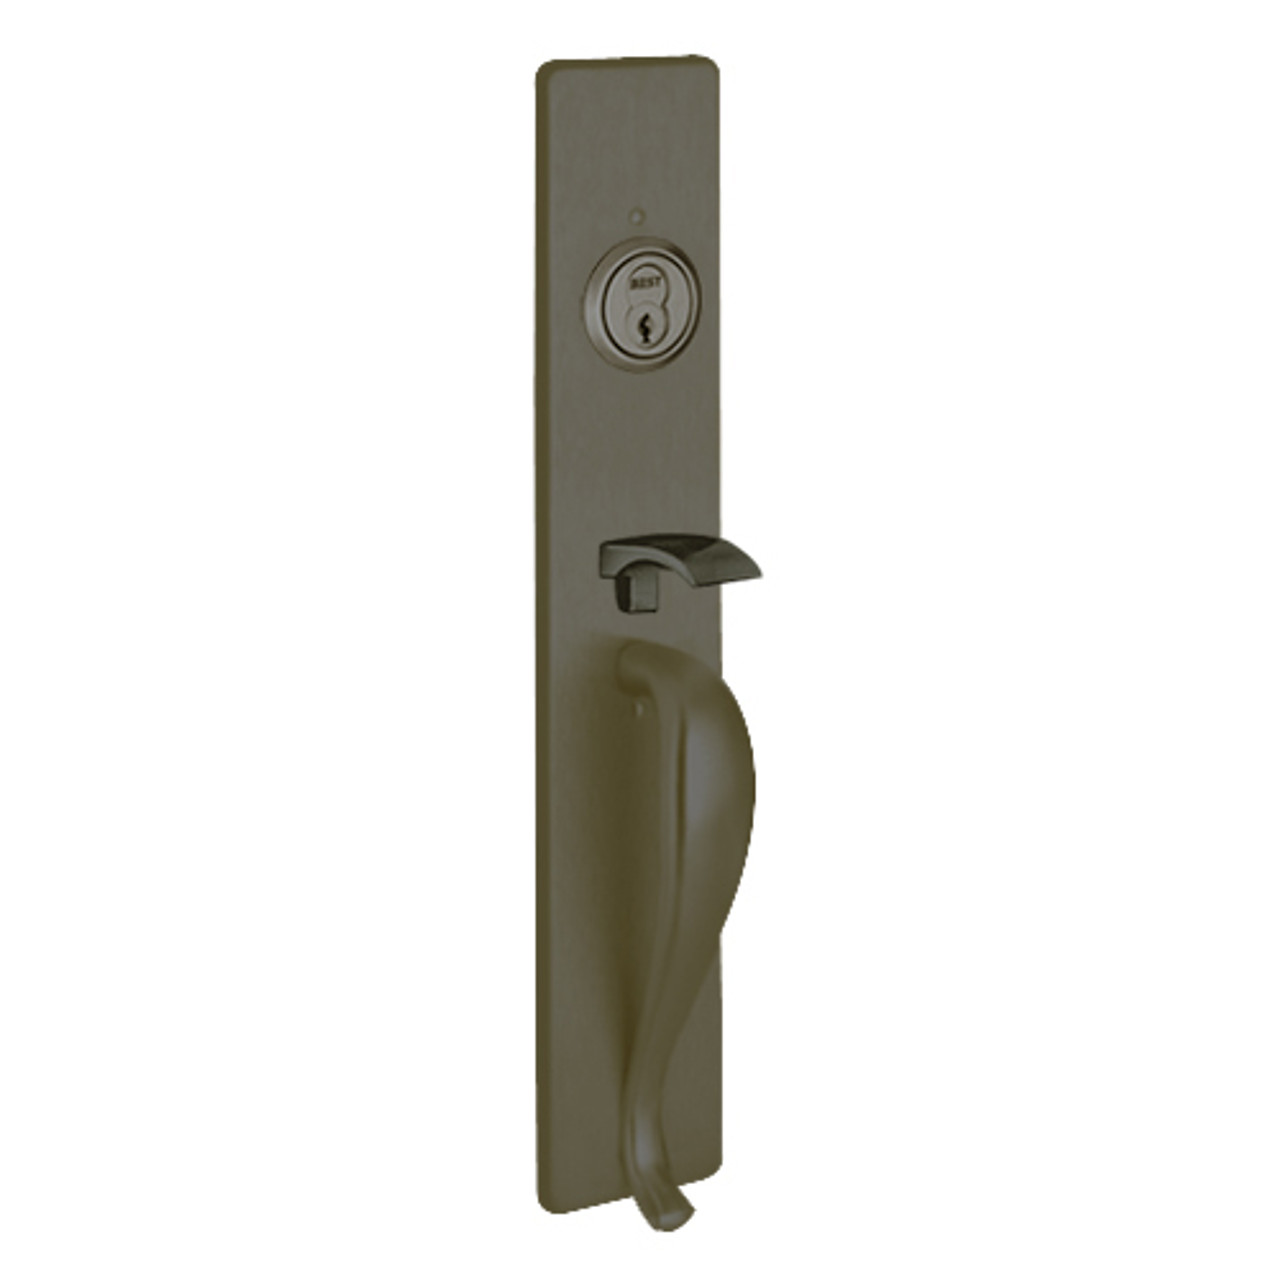 Y1705B-613 PHI Key Controls Thumb Piece Trim with B Design Pull for Olympian Series Device in Oil Rubbed Bronze Finish